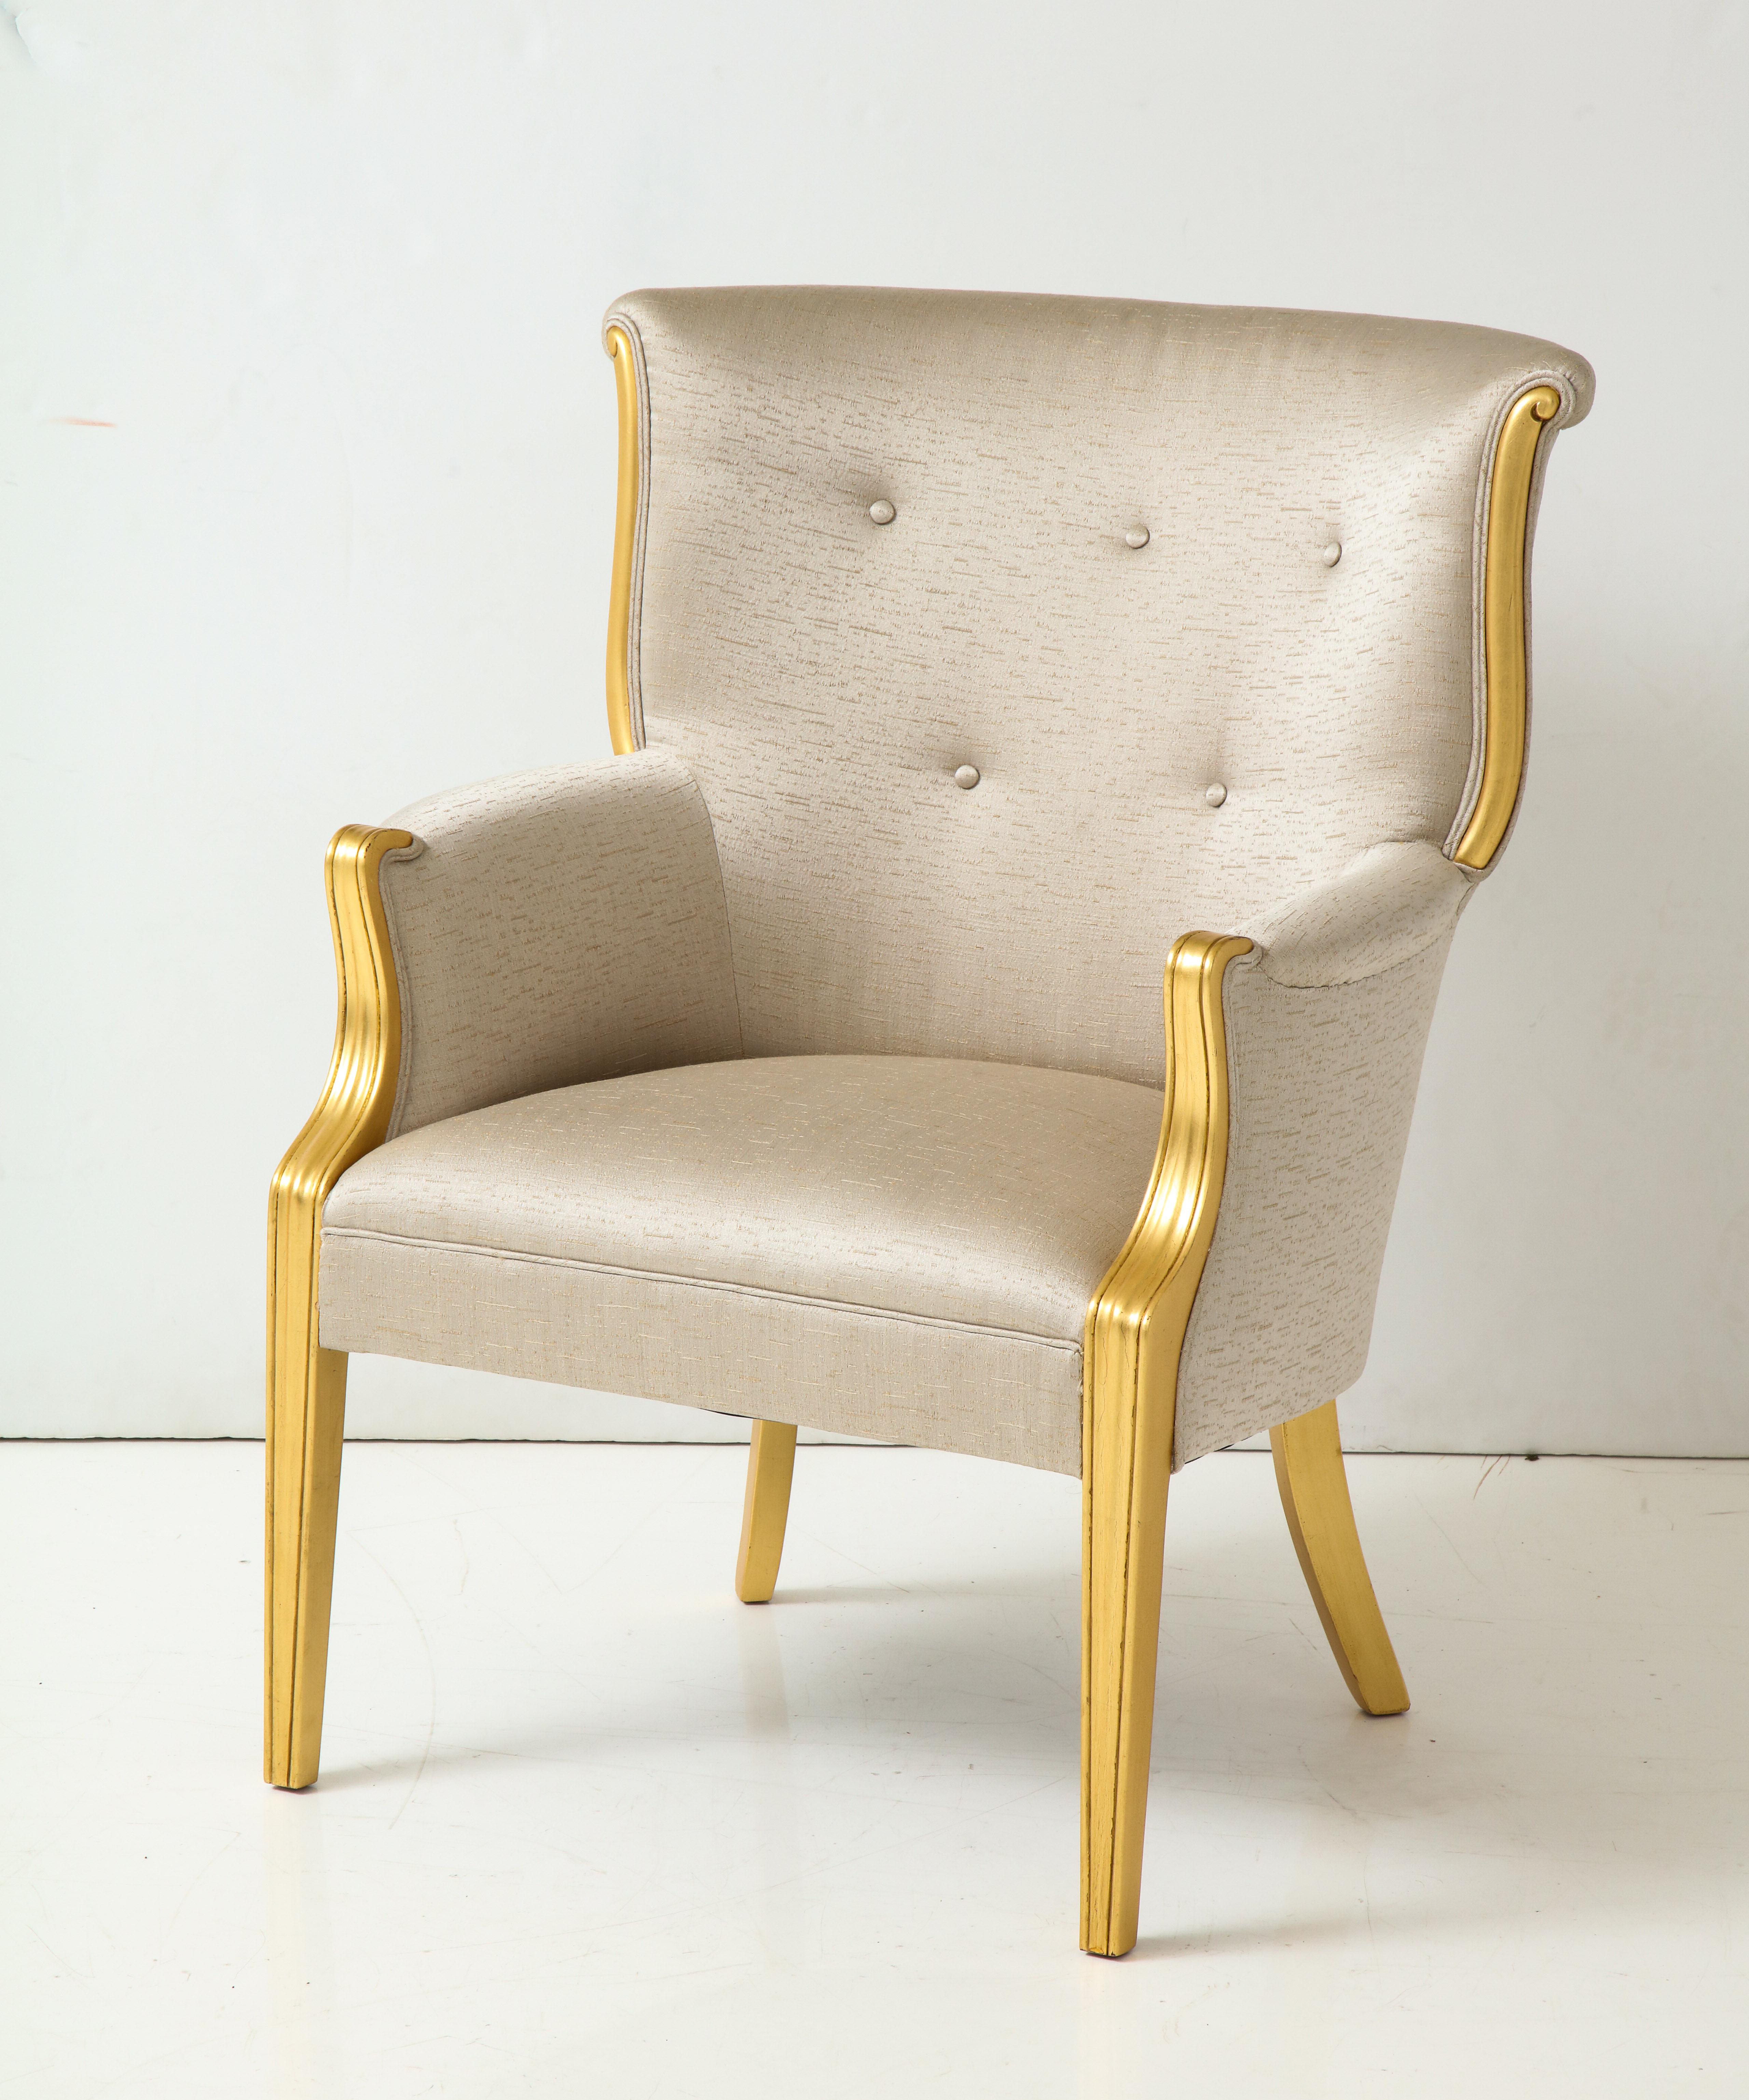 1940s Art Deco club chair with a seductive gilded carved wood frame, upholstered in a heavy silk/cotton silver fabric with a gold thread underlay. Mint restored.